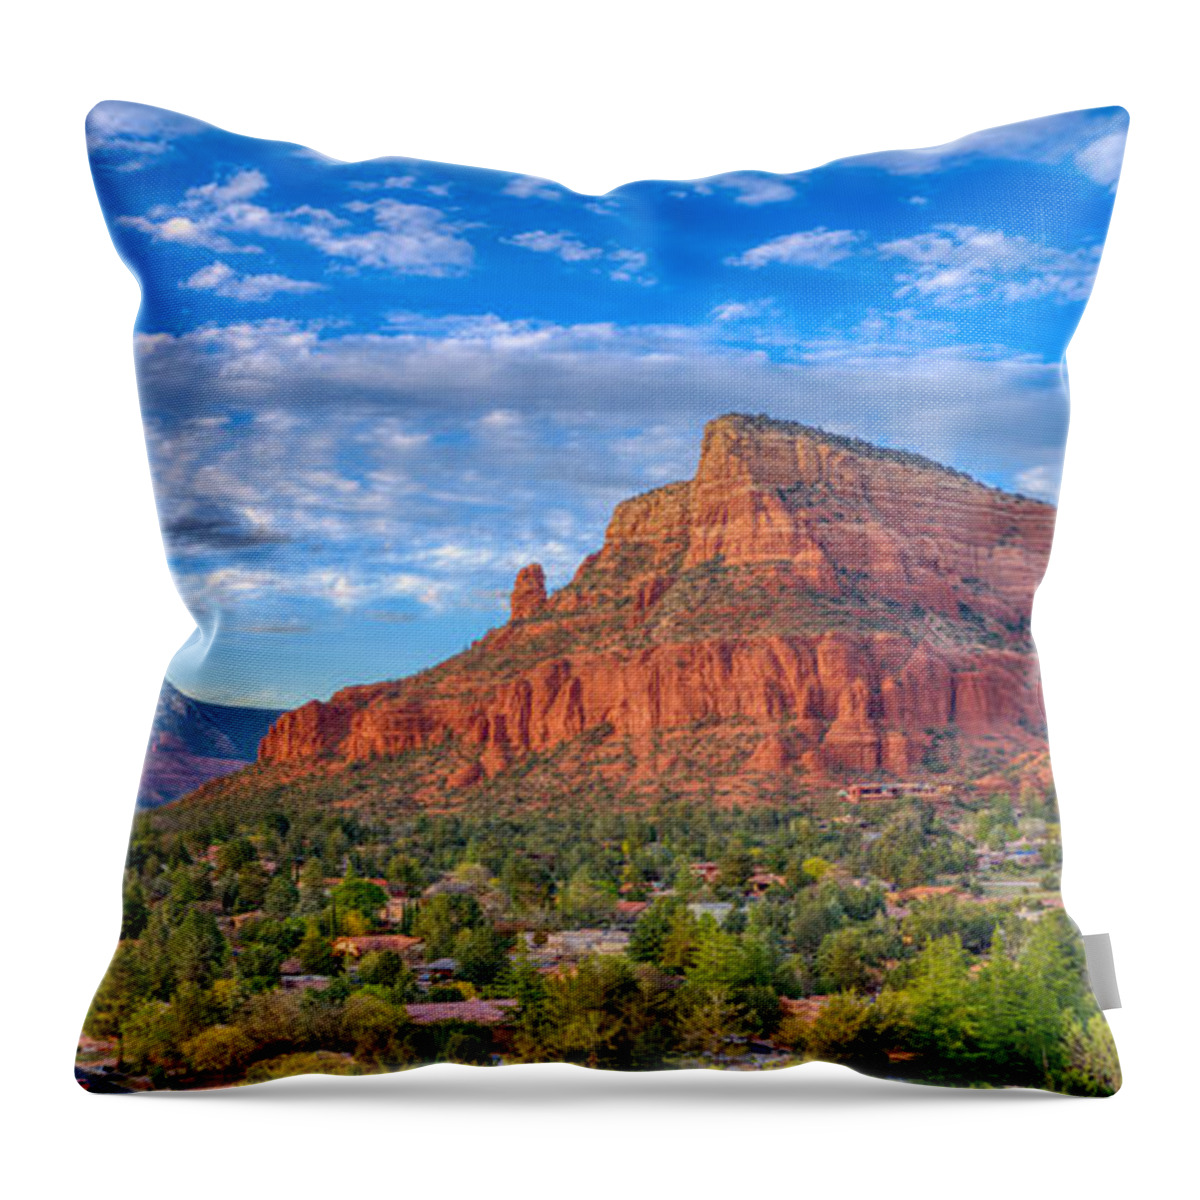 Sky Throw Pillow featuring the photograph Sedona Vibe by Anthony Giammarino